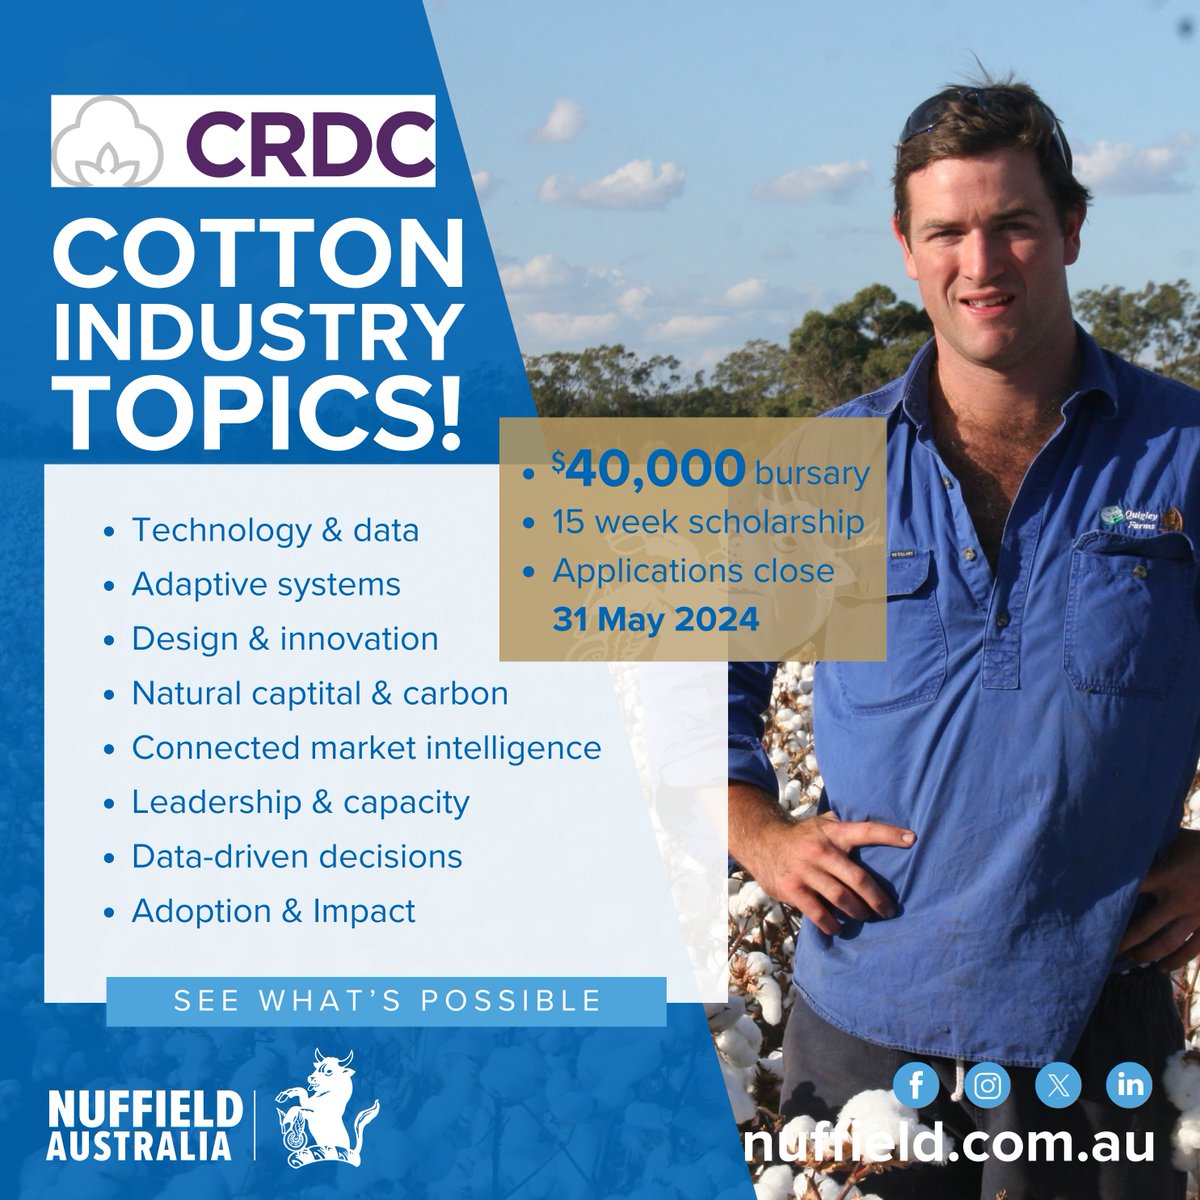 ARE YOU directly involved in the cotton industry in Australia, if so apply for a 2025 Nuffield Scholarship, generously supported by the Cotton Research & Development Corporation Apply Today: nuffield.com.au/how-to-apply #nuffieldag #aussiefarmers #cotton #growers